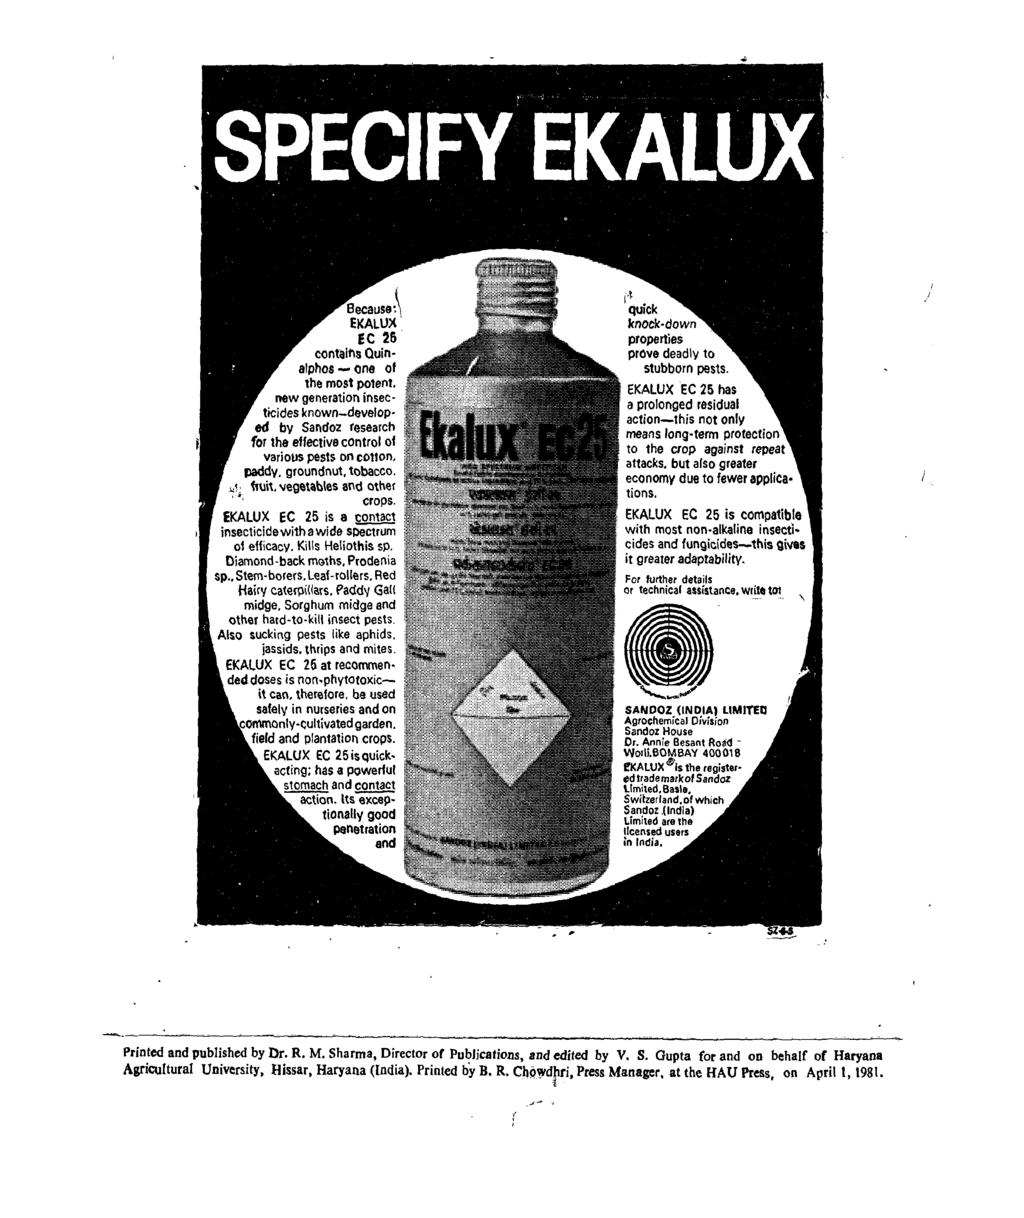 I,t quick knock down properties prove deadly to stubborn pests, EKALUX EC 25 has a prolonged residual action-this not only means long. term protection to the crop against repeat attacks.